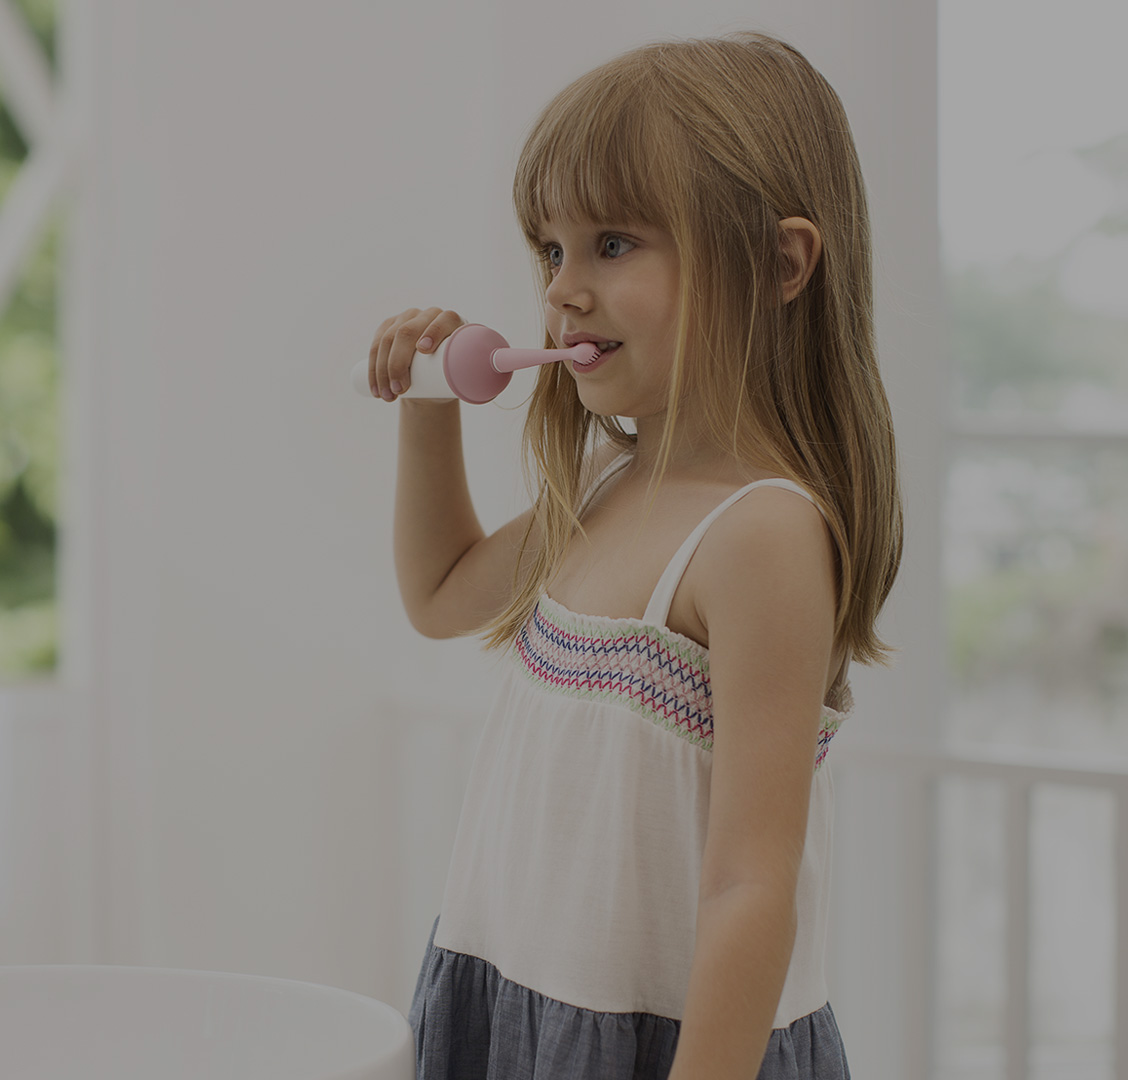 usmile Toothbrush - Conveying care with technoloy